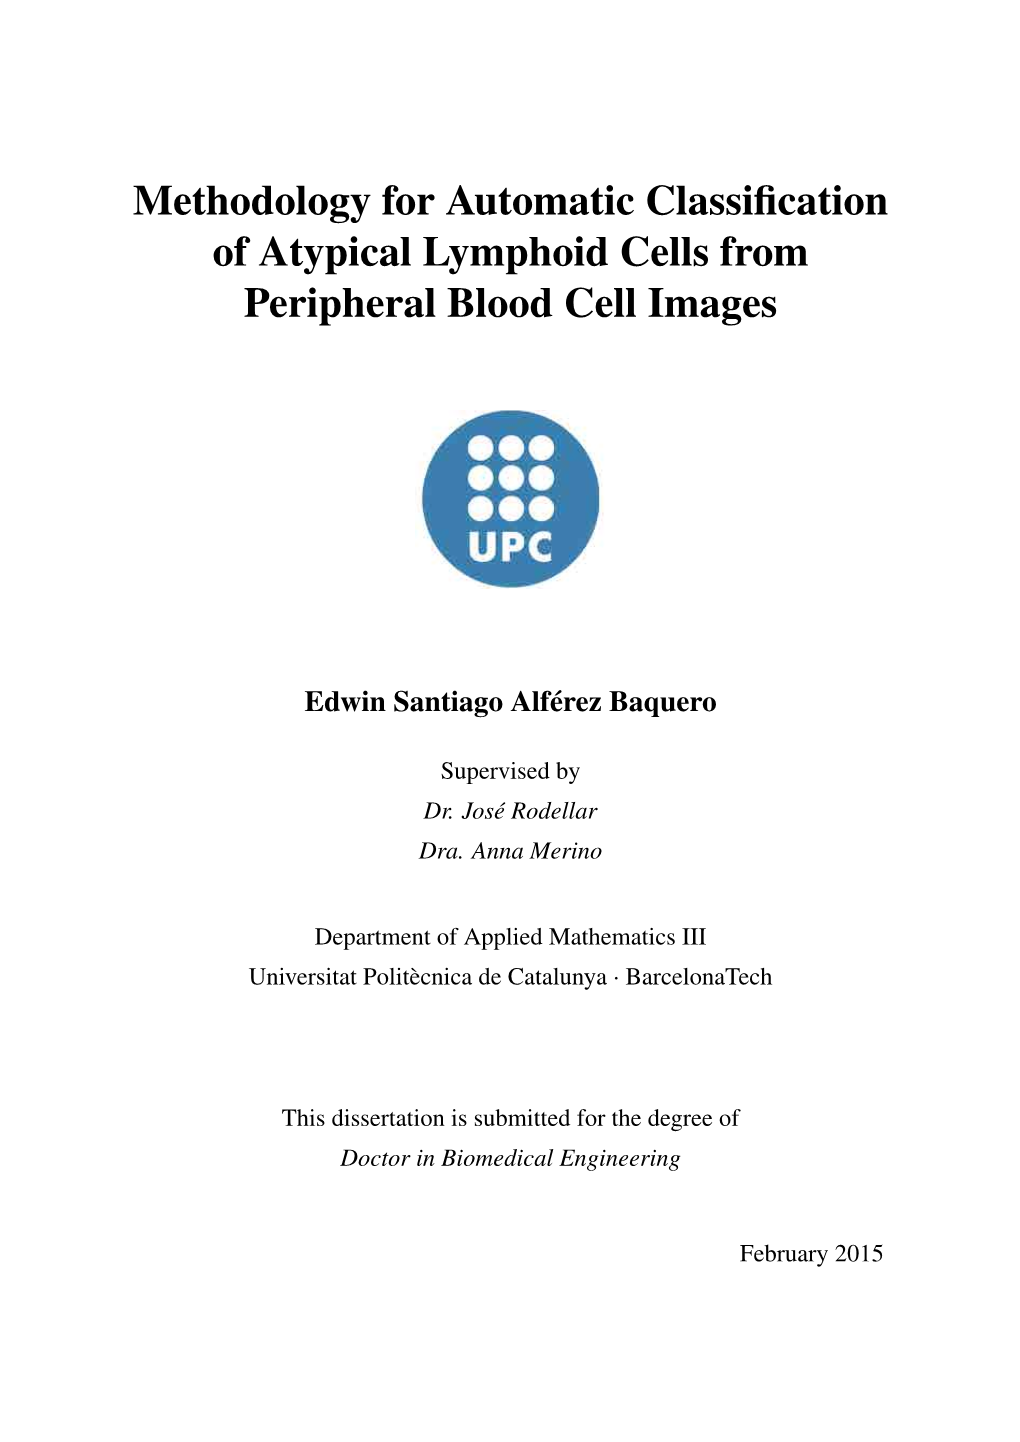 Methodology for Automatic Classification of Atypical Lymphoid Cells from Peripheral Blood Cell Images